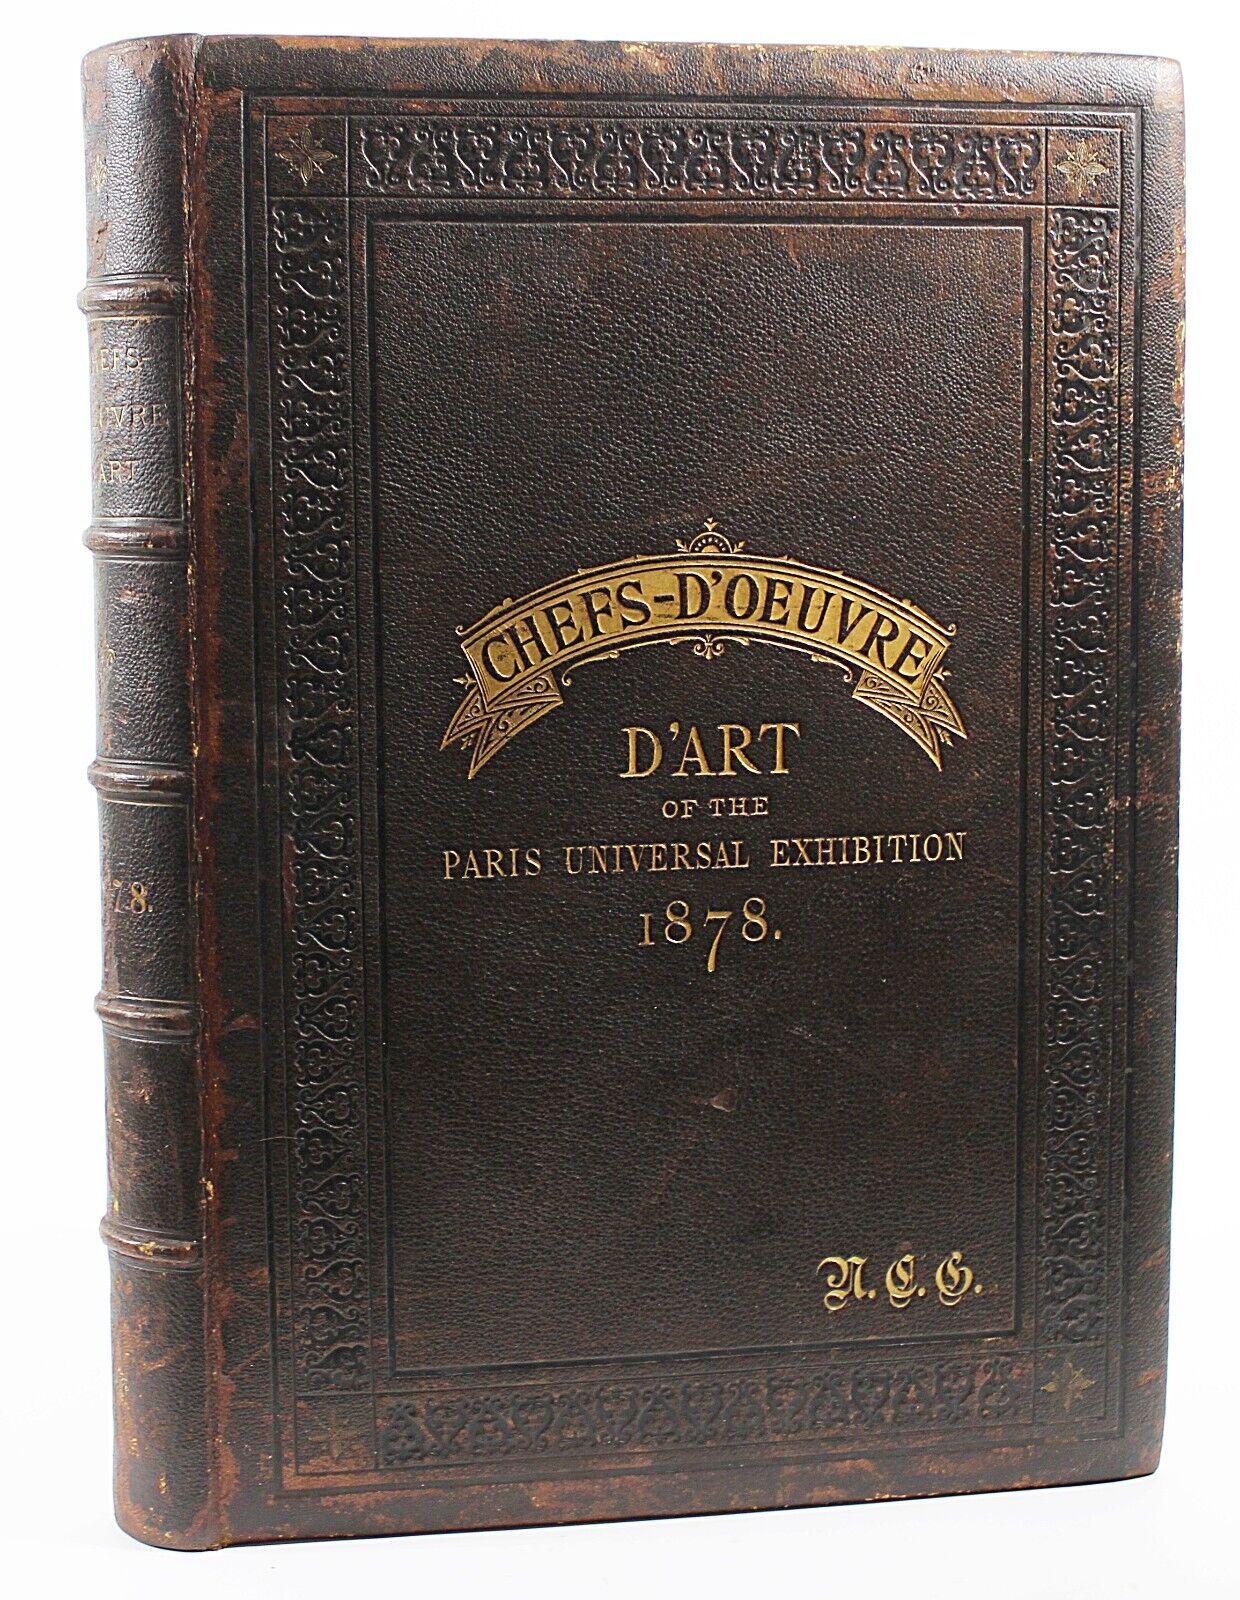 THE CHEFS-D'OEUVRE D'ART OF THE INTERNATIONAL EXHIBITION 1878 Larger Folio Book